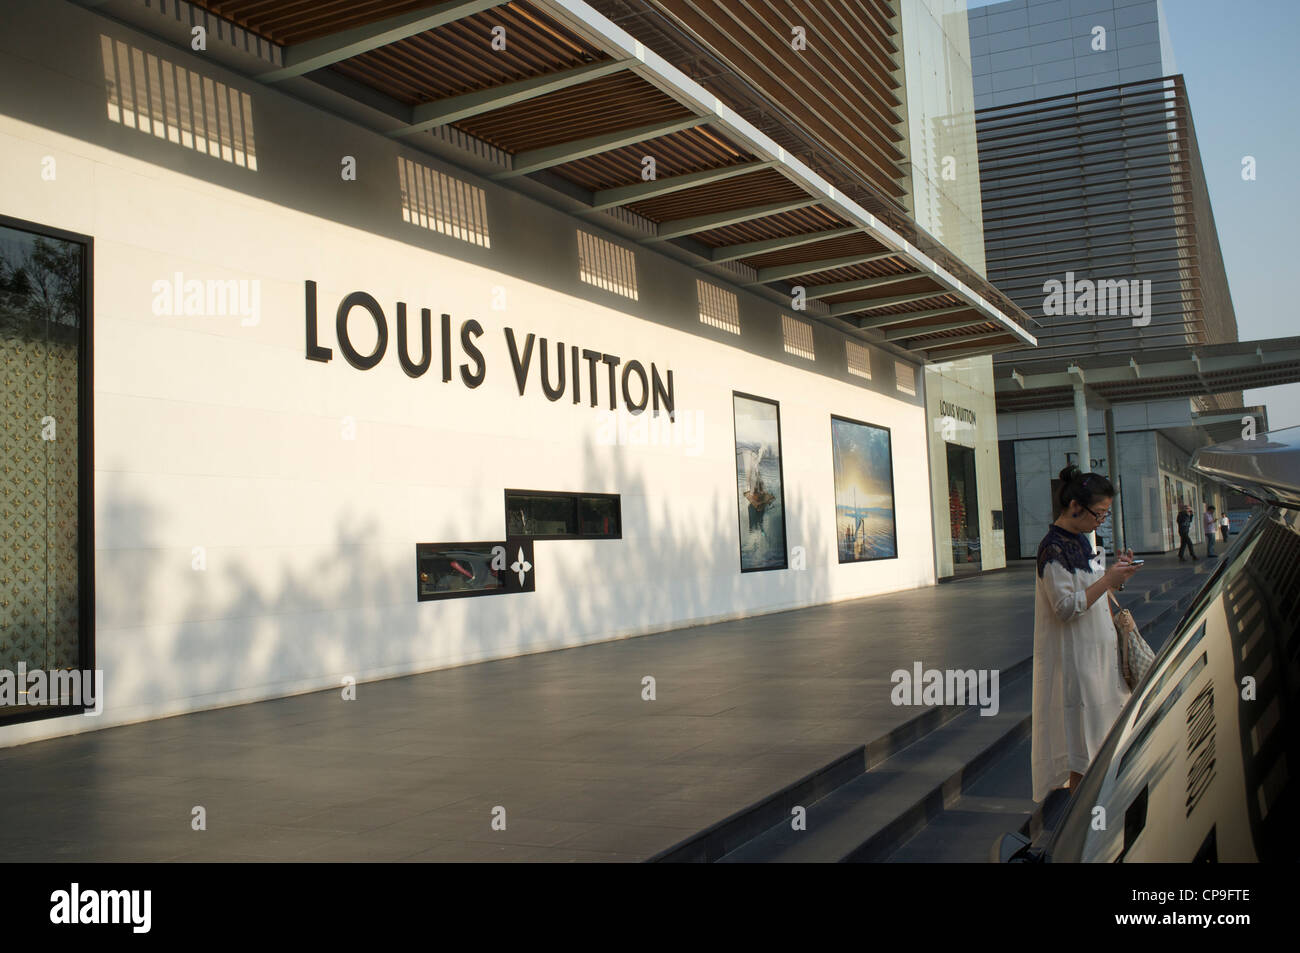 Louis Vuitton at Friendship Department Store, the first high-end Stock Photo, Royalty Free Image ...